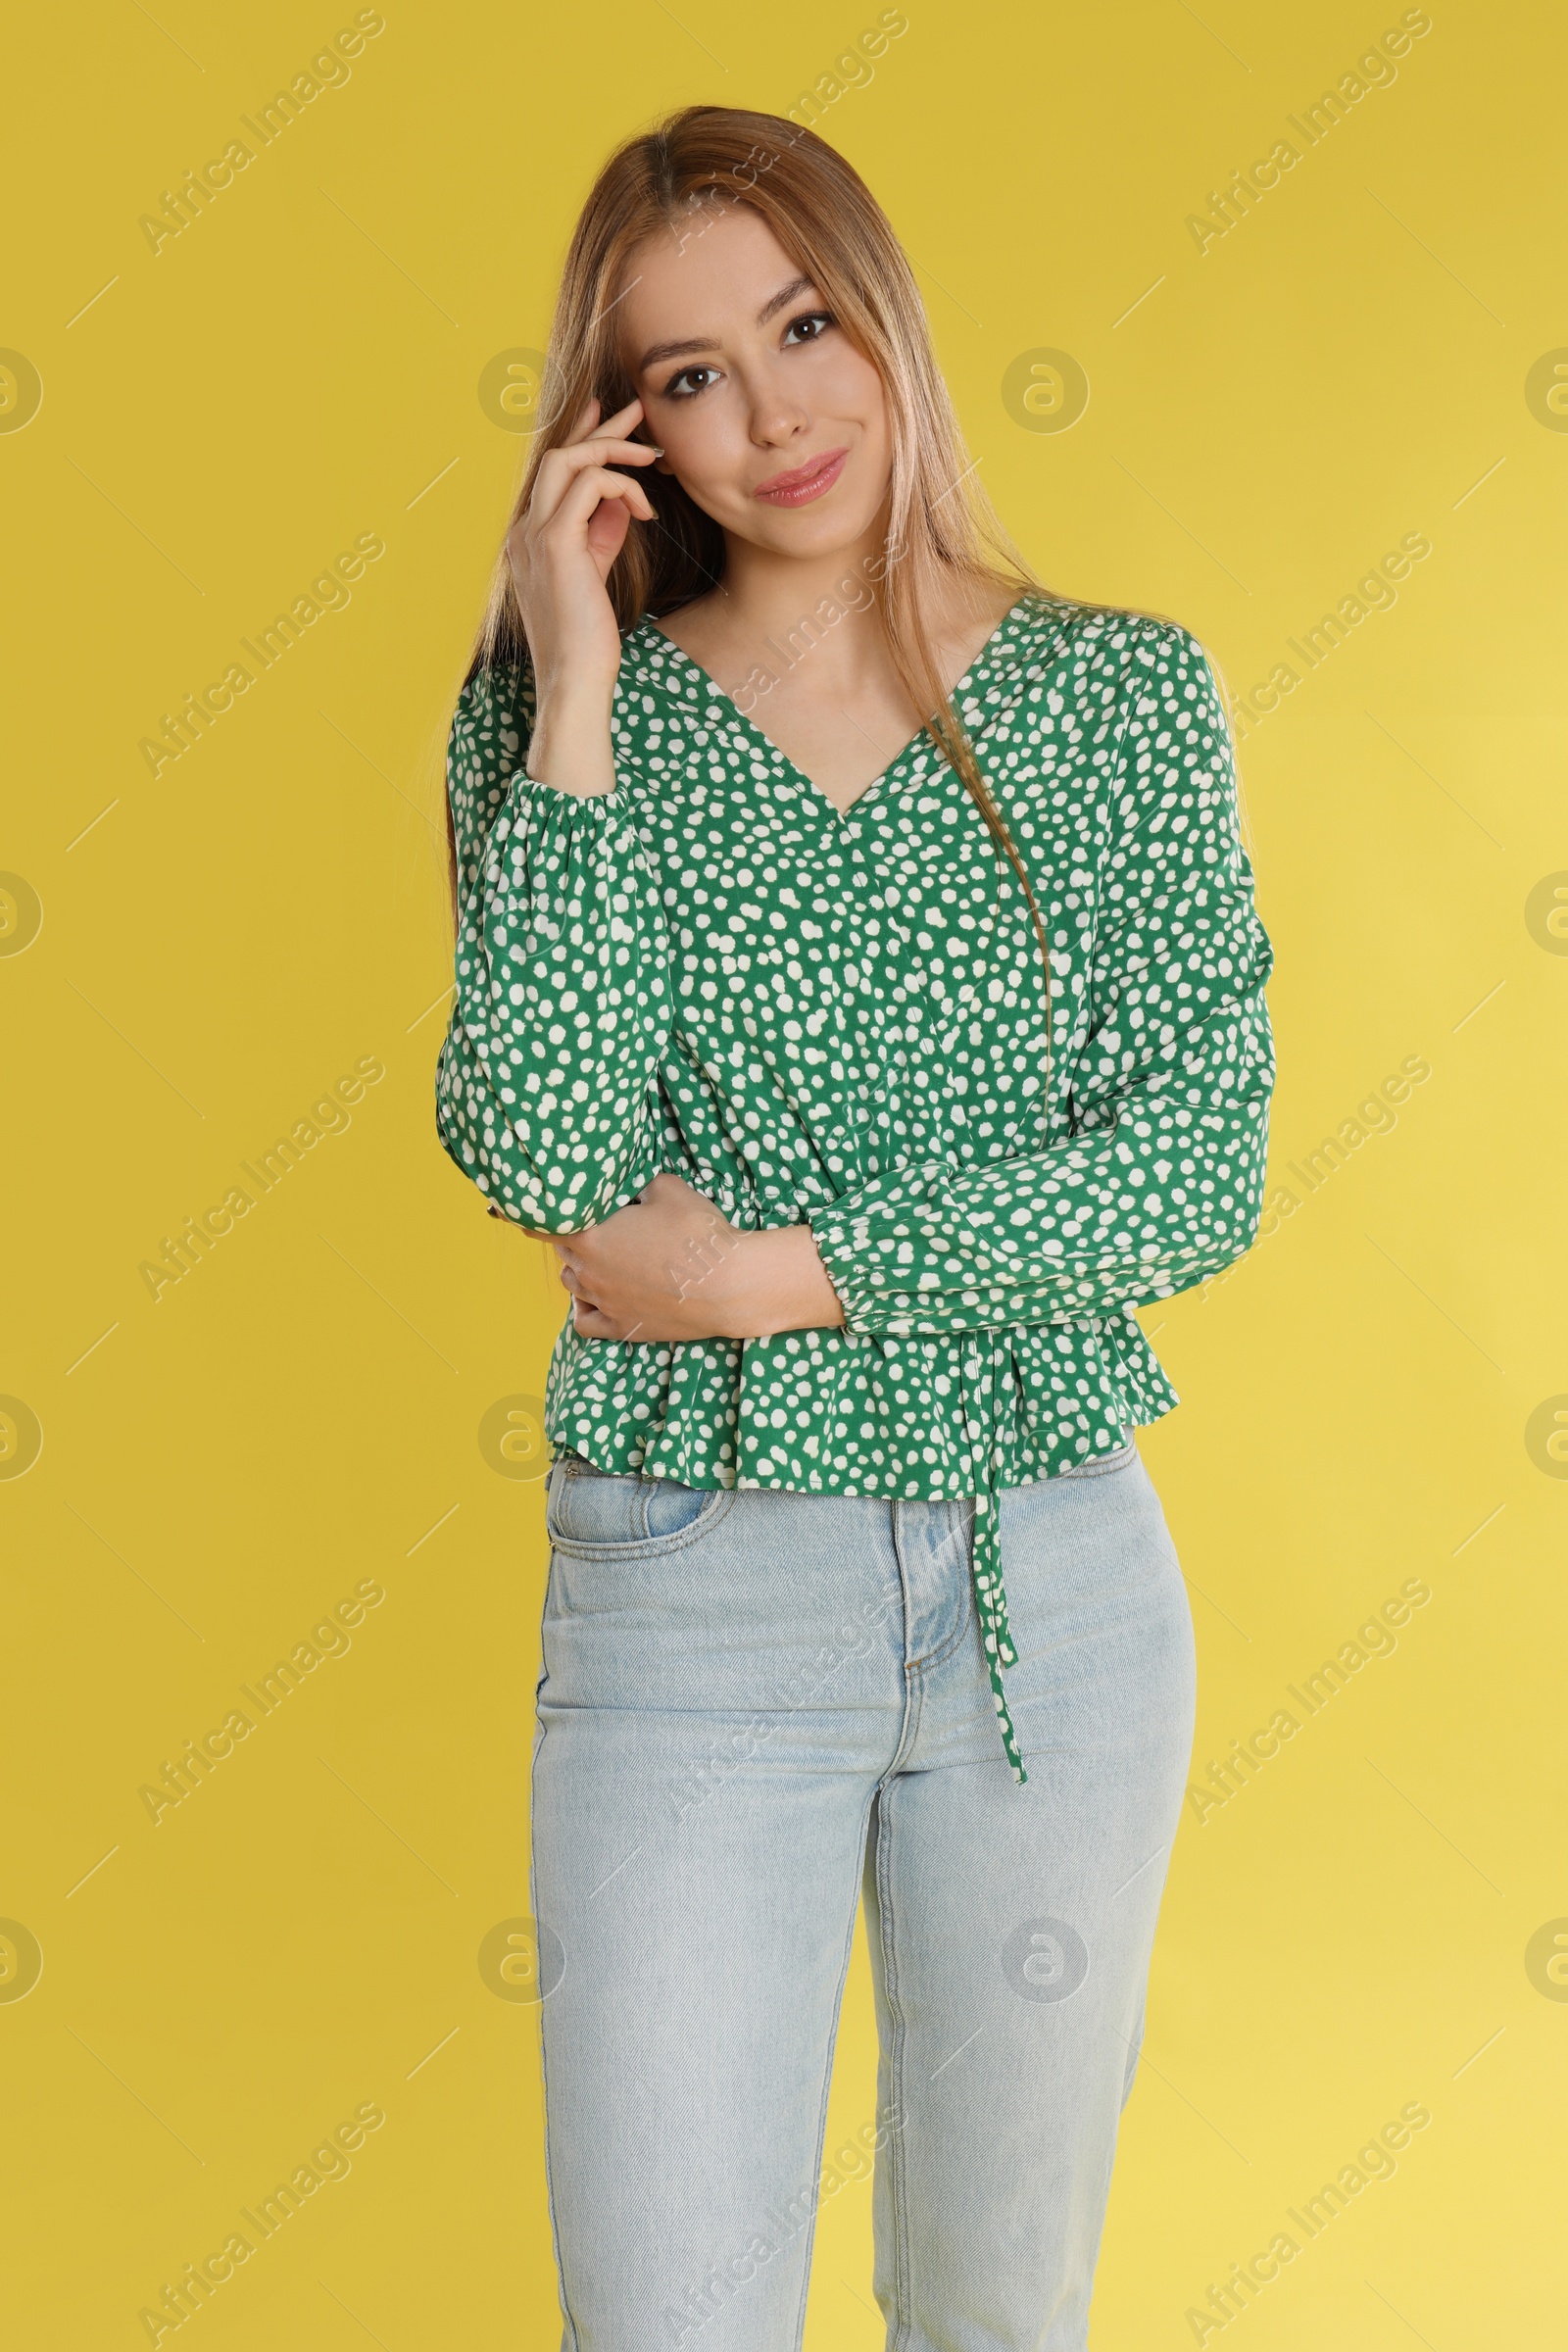 Photo of Teenage girl in casual outfit on yellow background